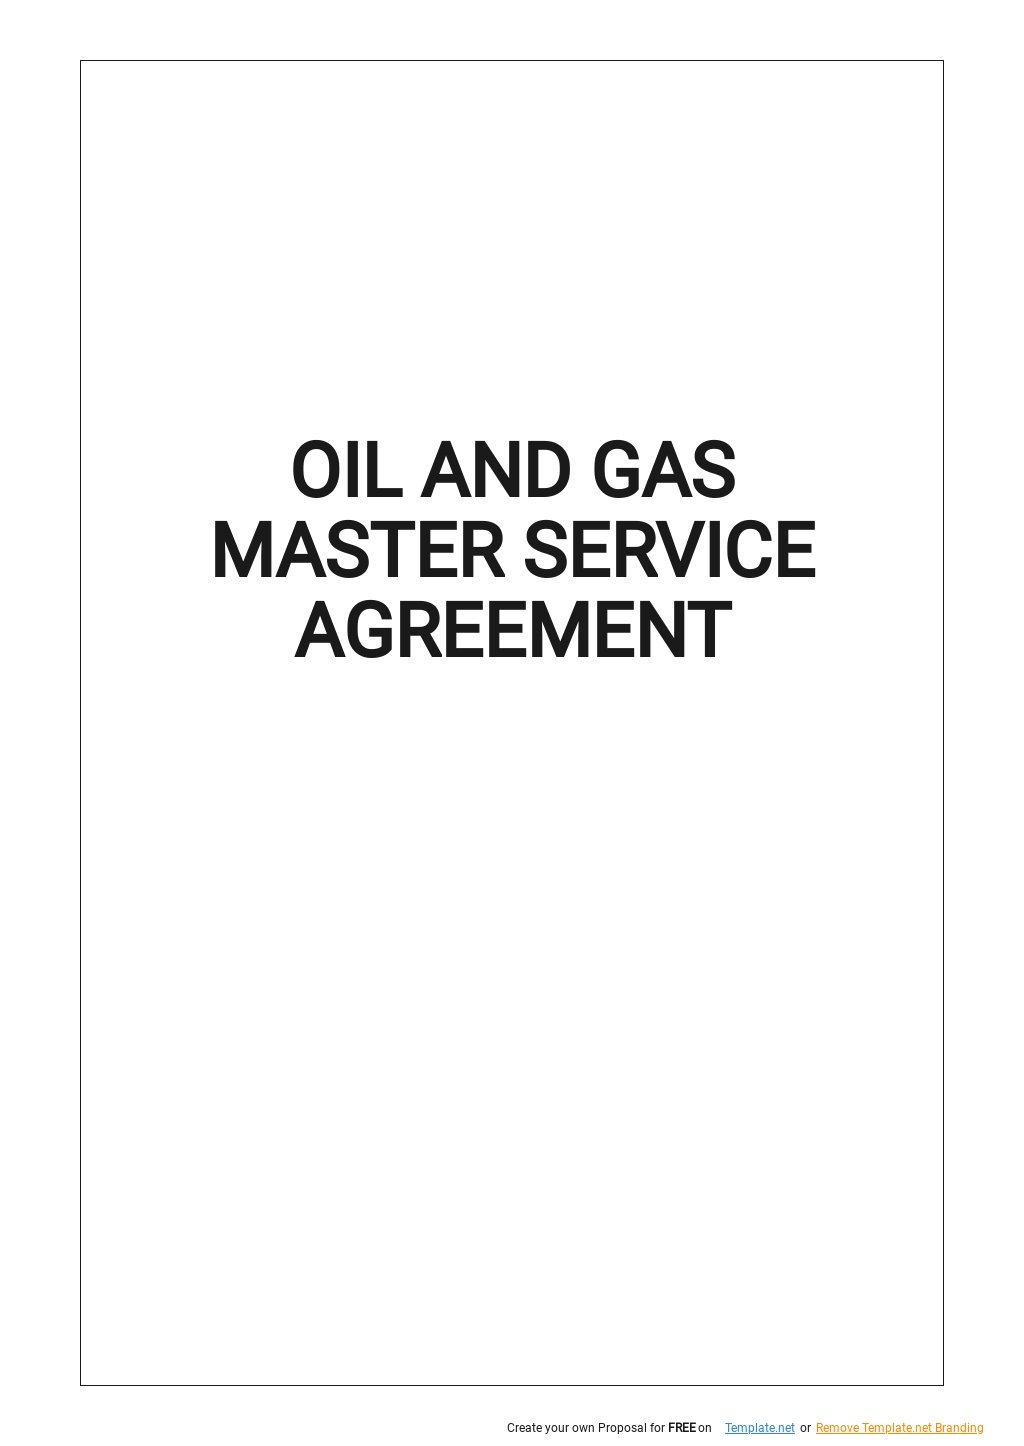 Oil and Gas Master Service Agreement Template.jpe